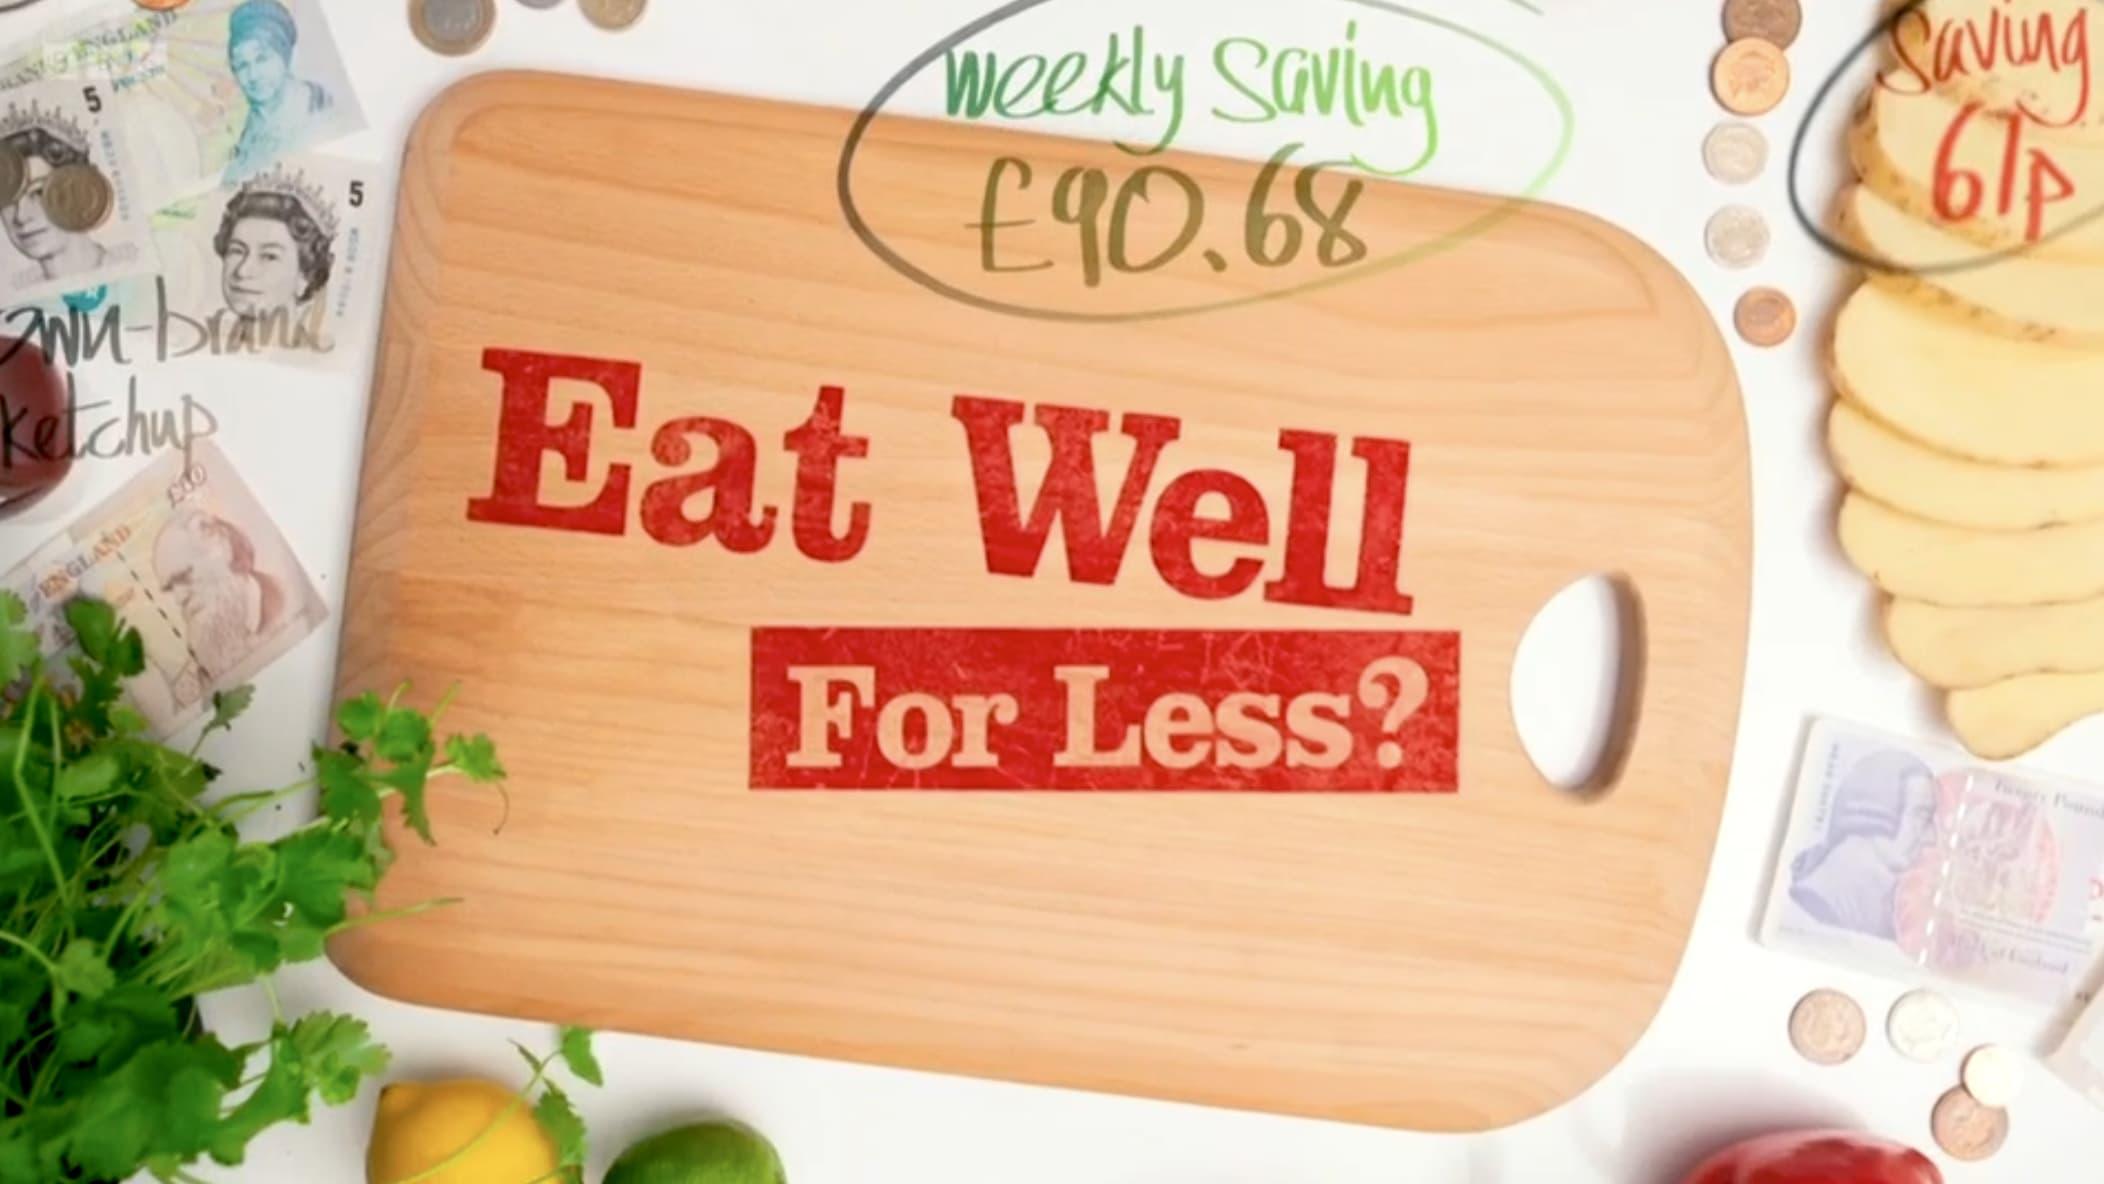 Eat Well for Less backdrop